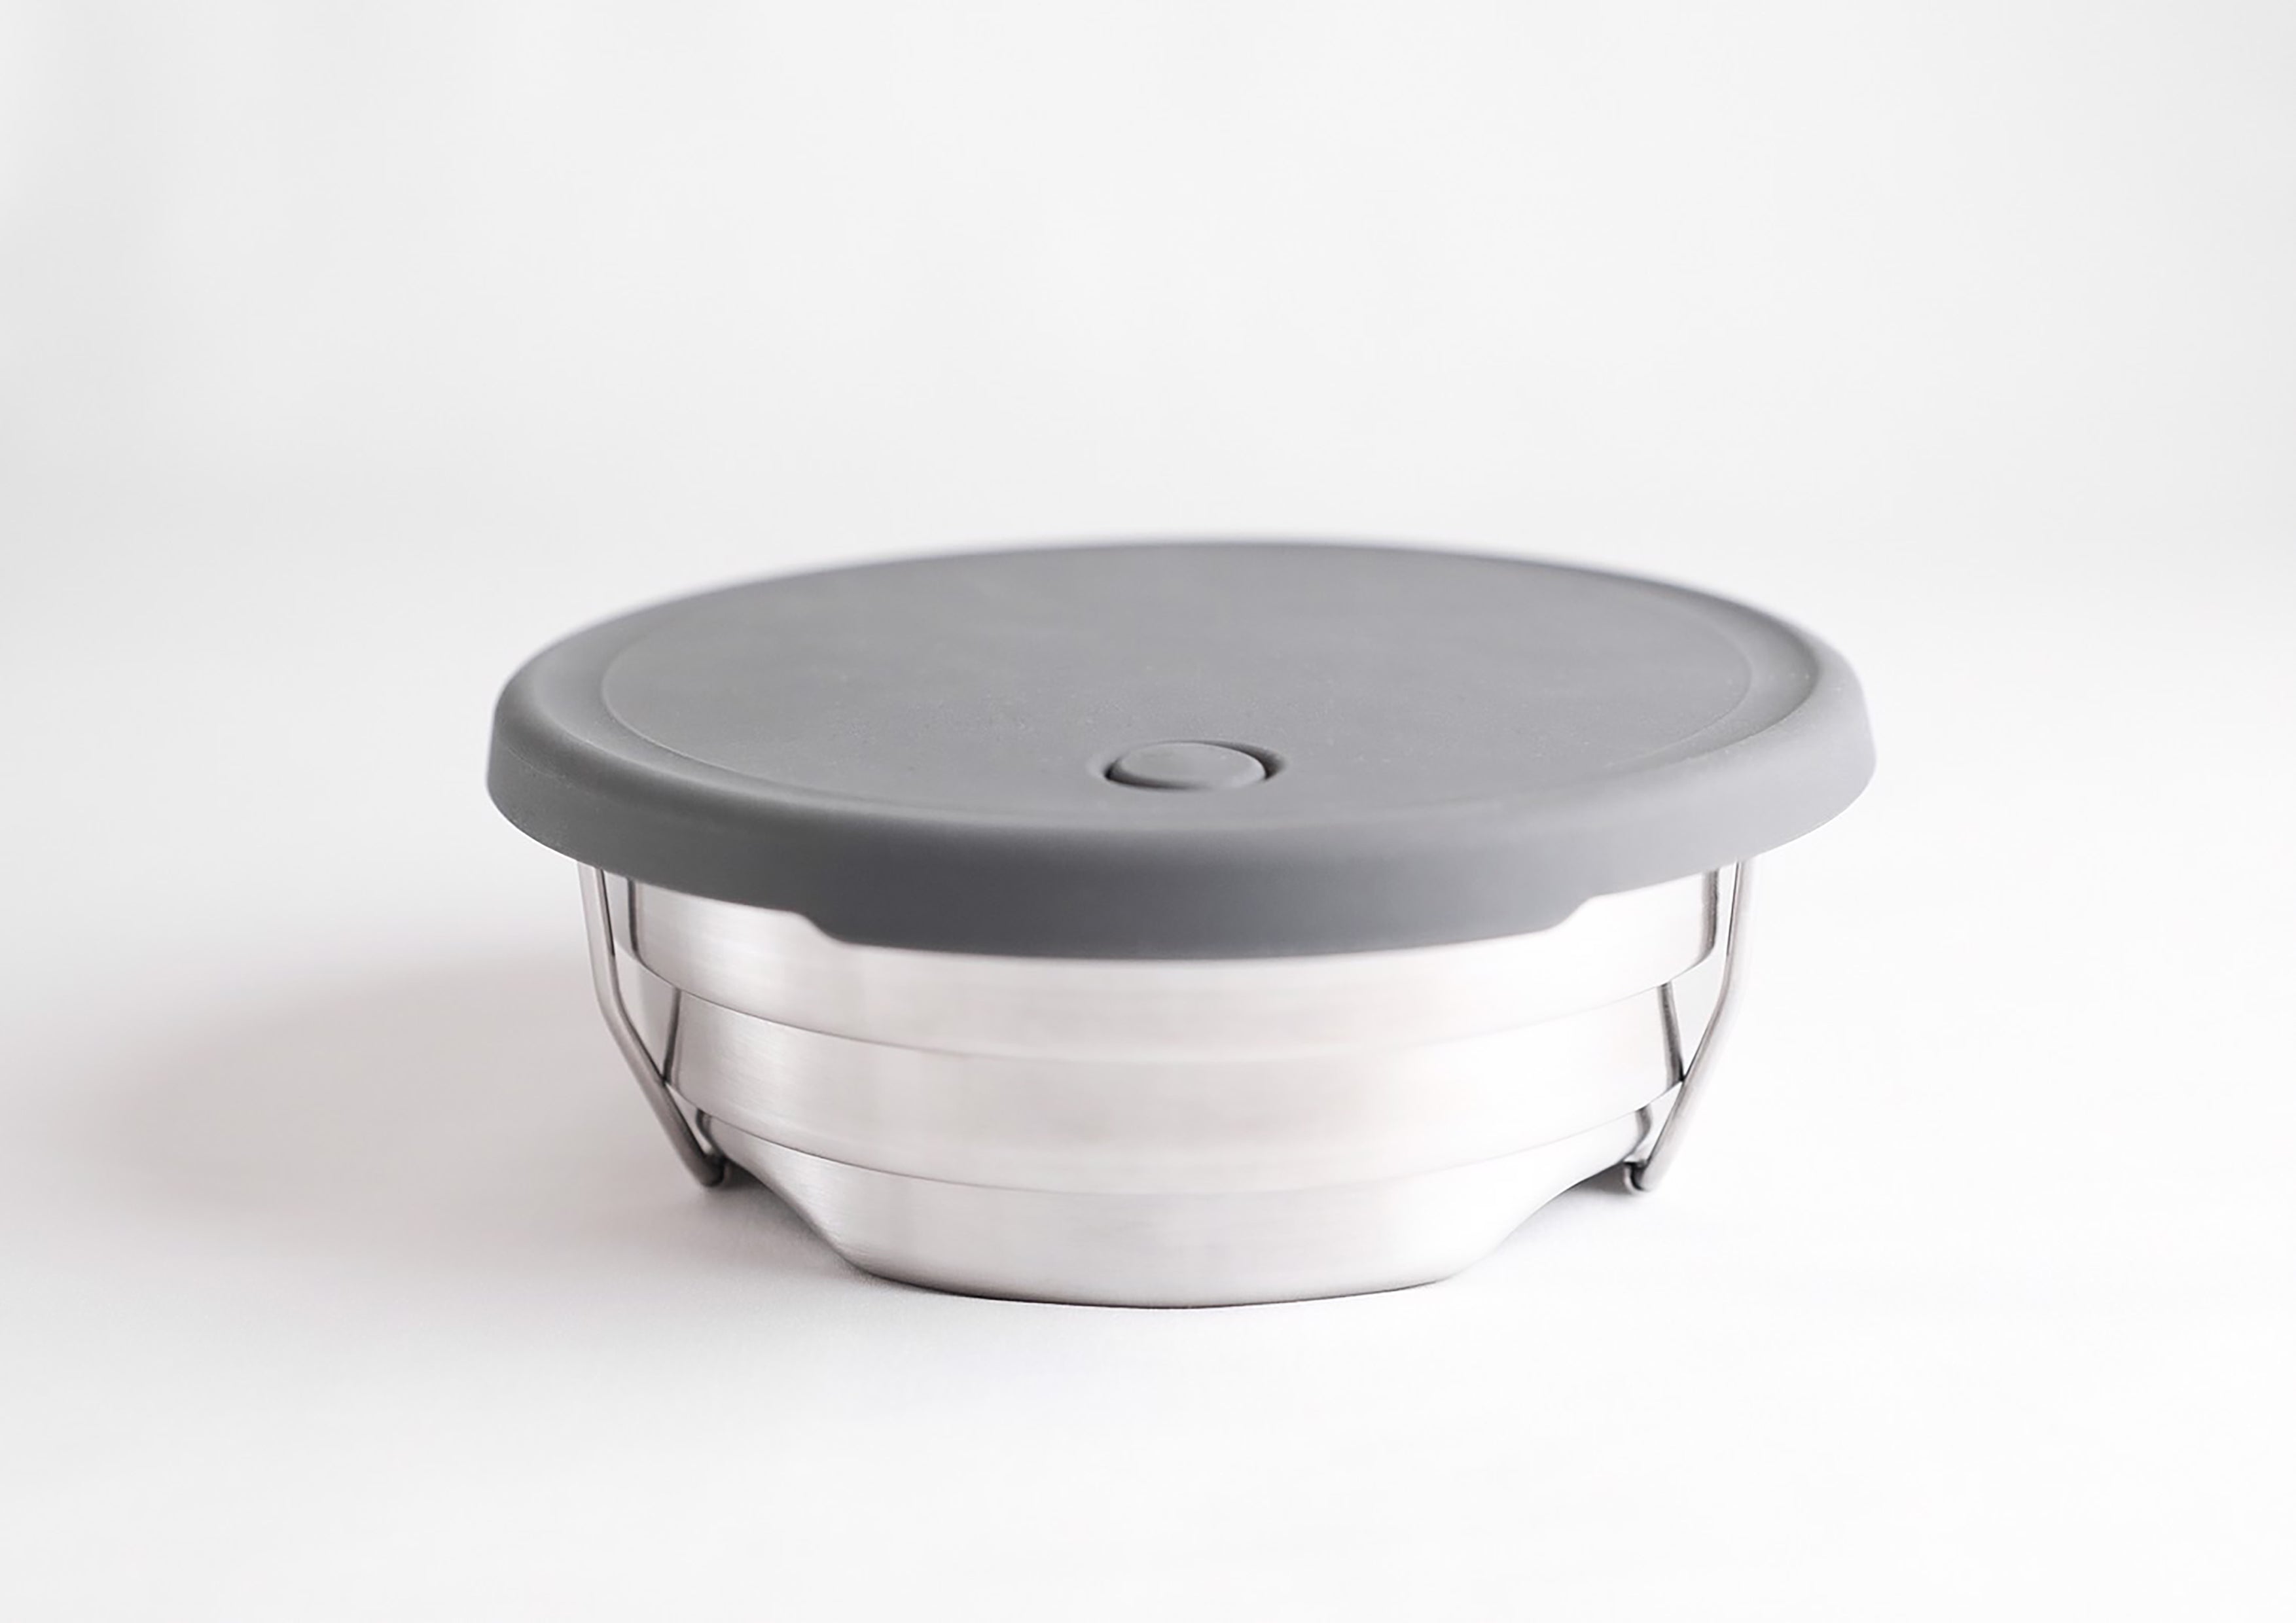 Collapsible steel camping pot compacts into a thin disc for easy carry